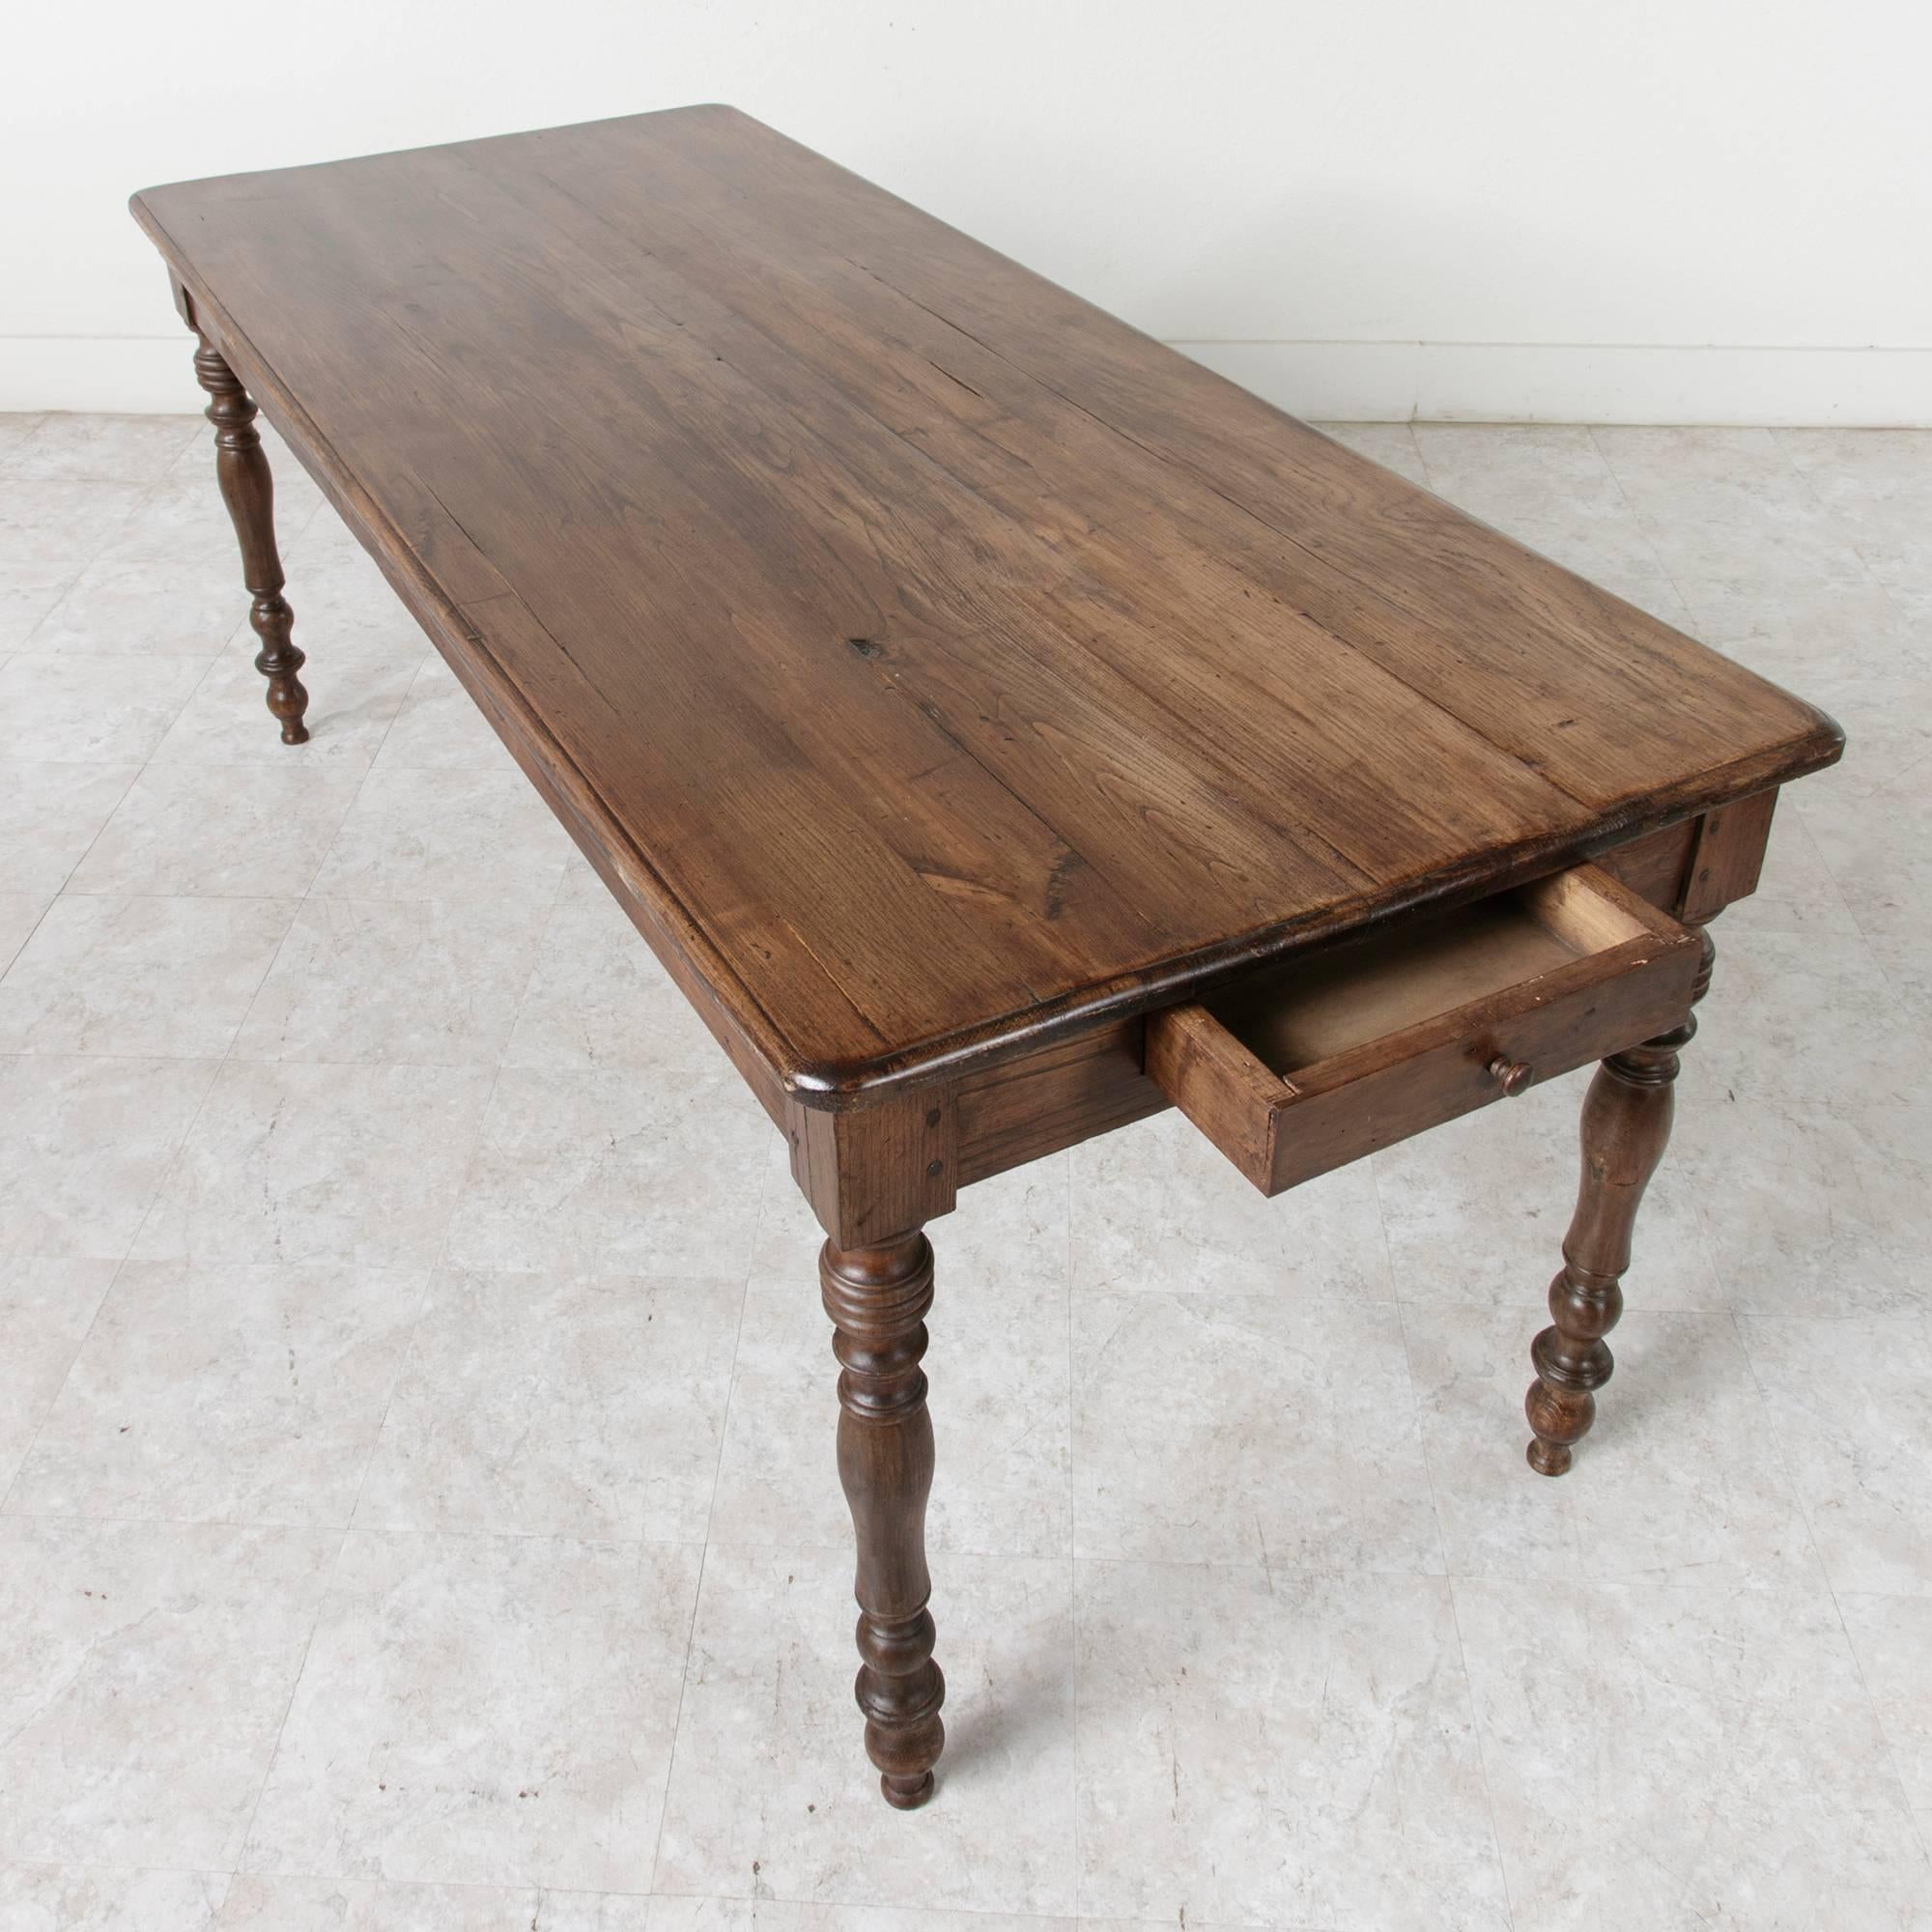 Antique French Hand Pegged Oak Dining Farm Table with Turned Legs and Drawers 3